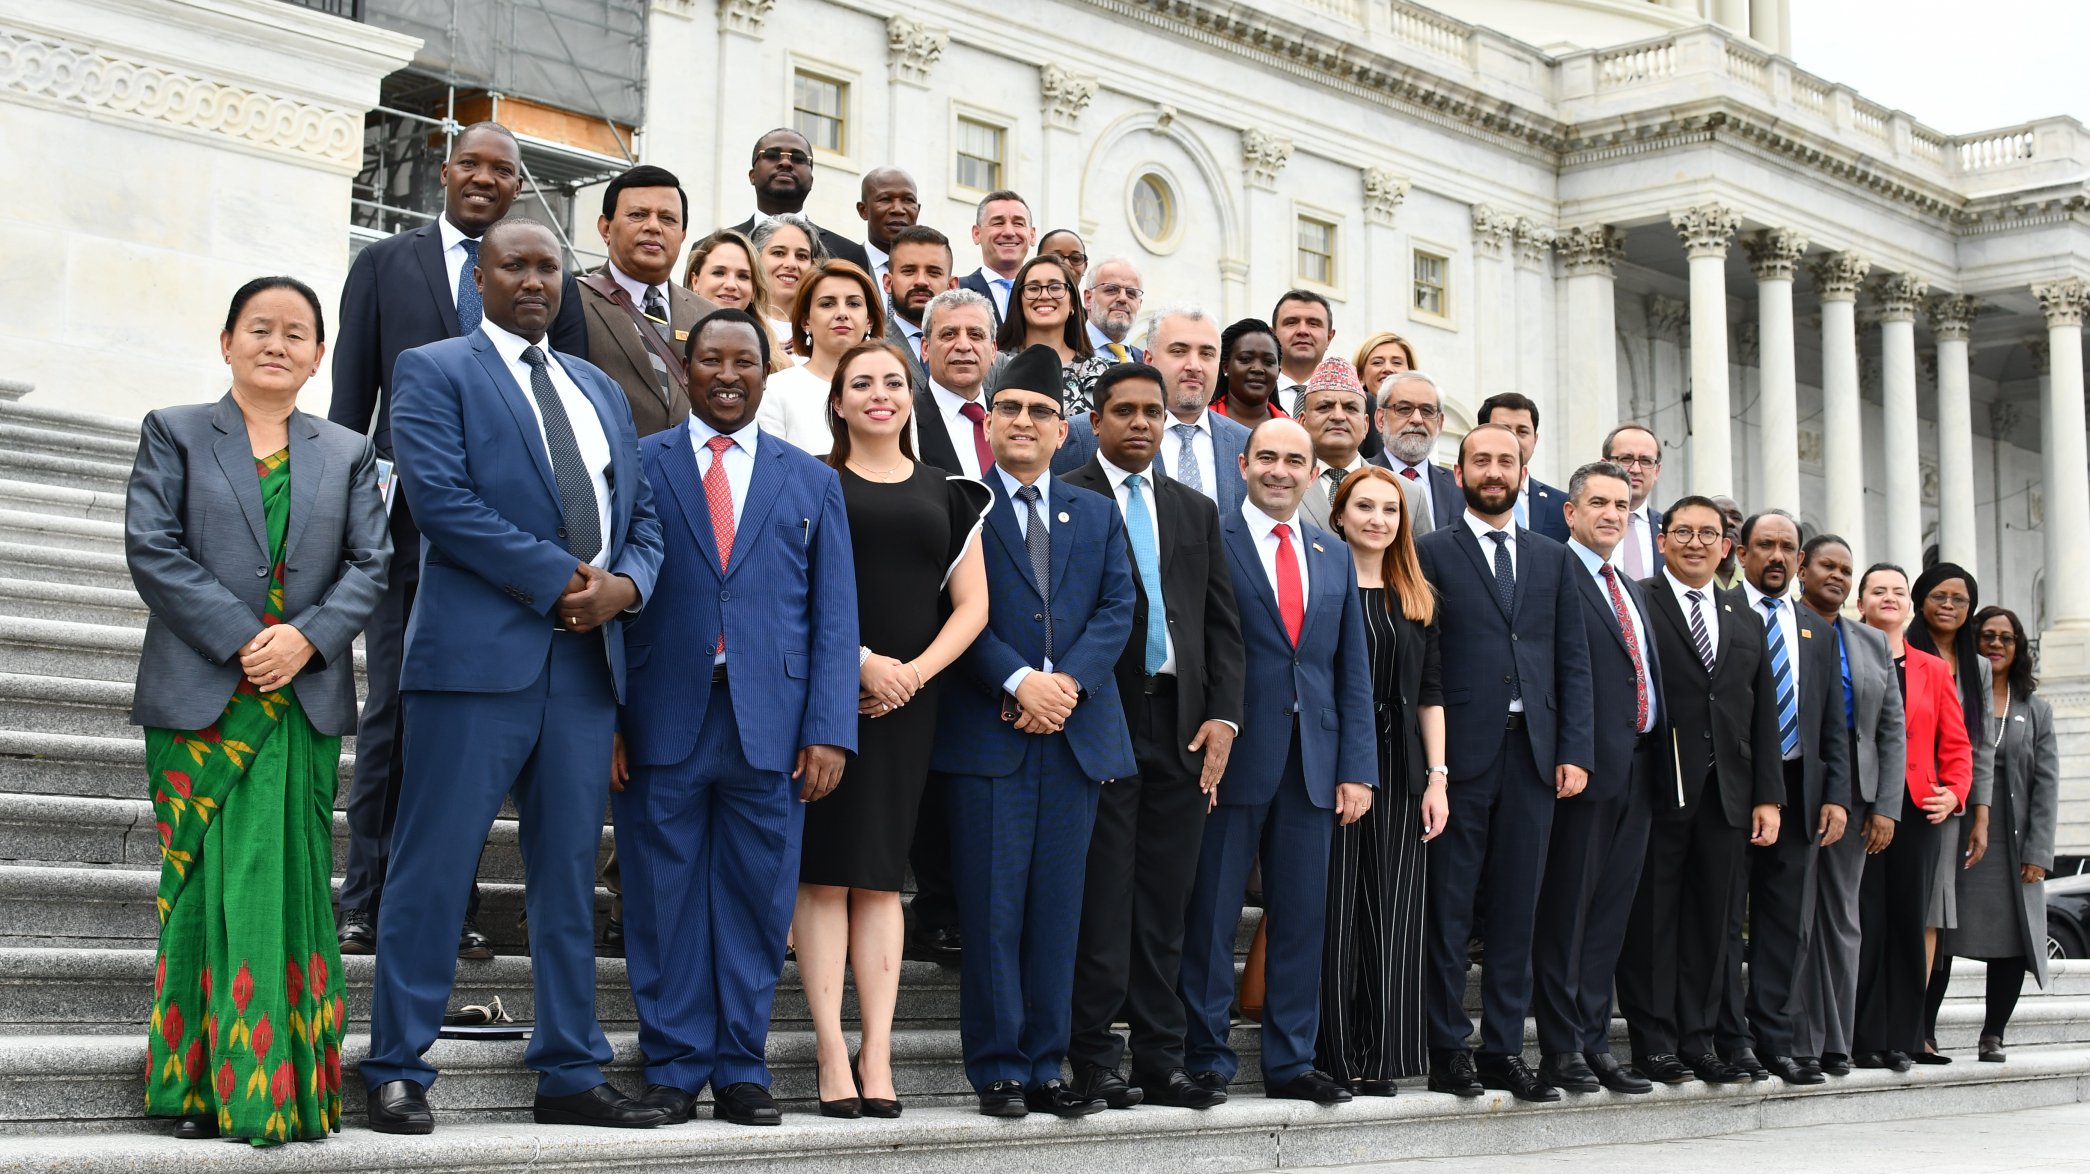 Delegates to the HDP Leadership Forum pose on the steps of the U.S. Capitol building.